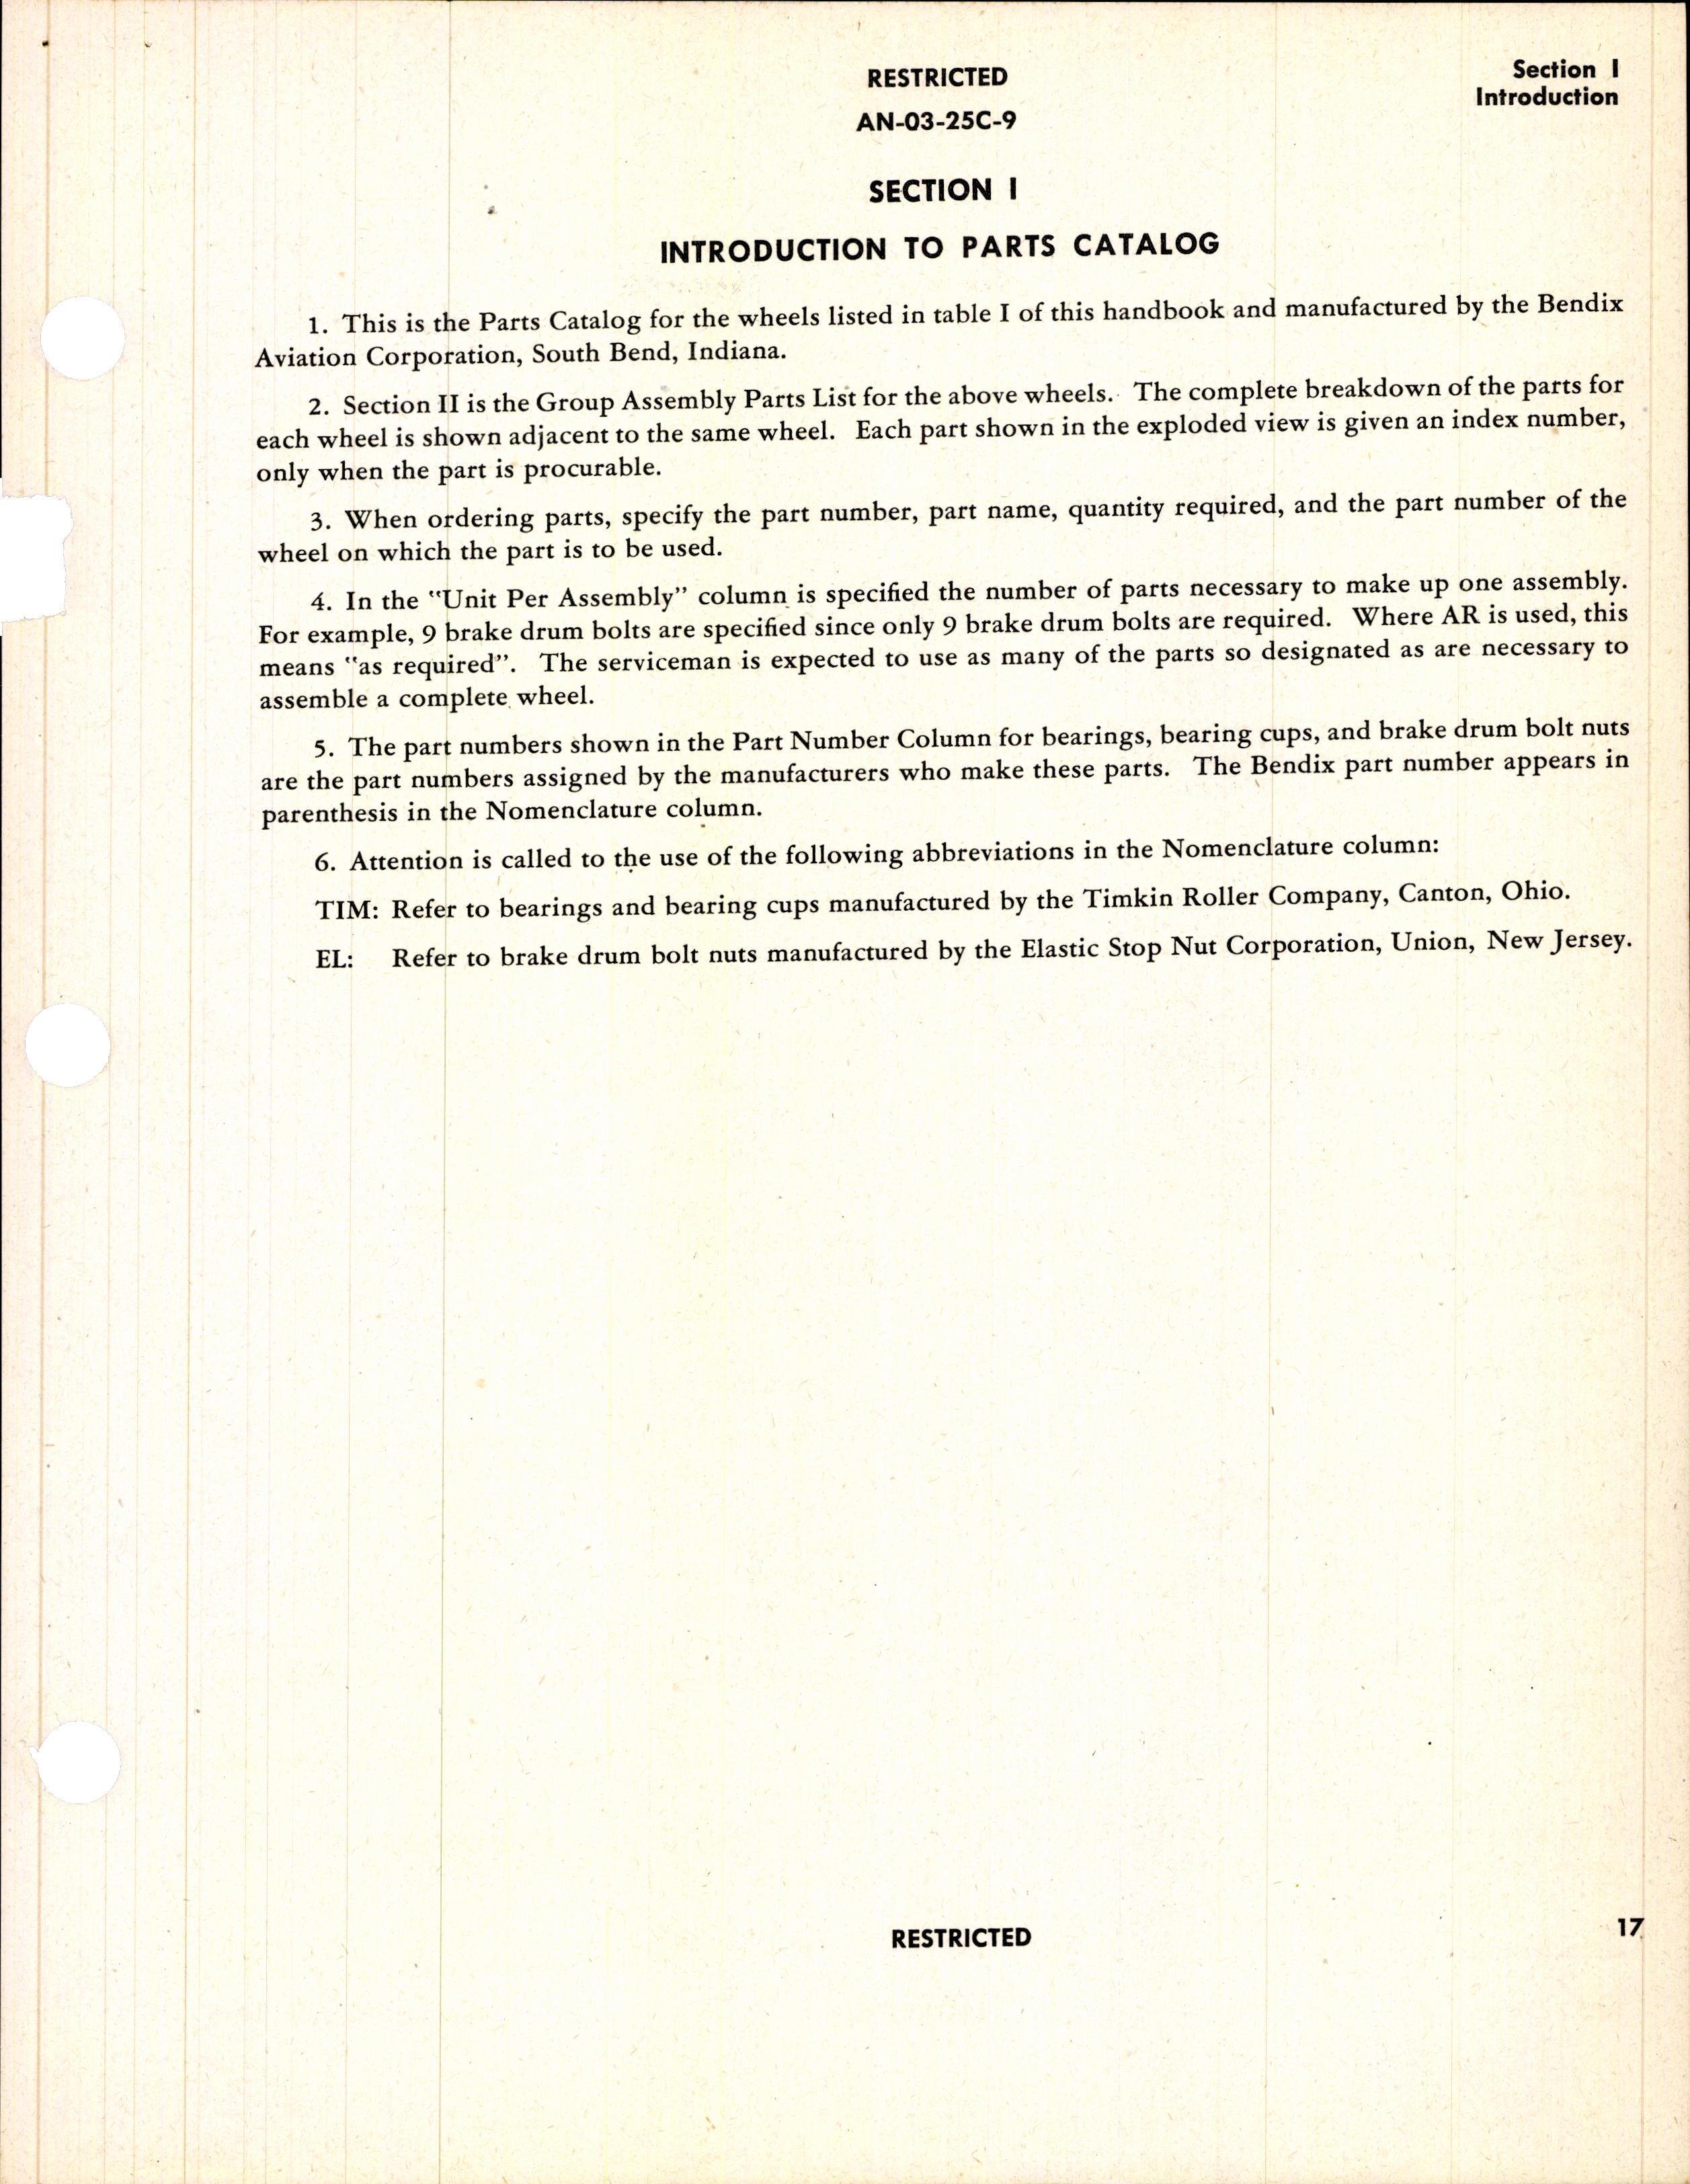 Sample page 13 from AirCorps Library document: Operation, Service and Overhaul Instructions with Parts Catalog for Bendix Wheels